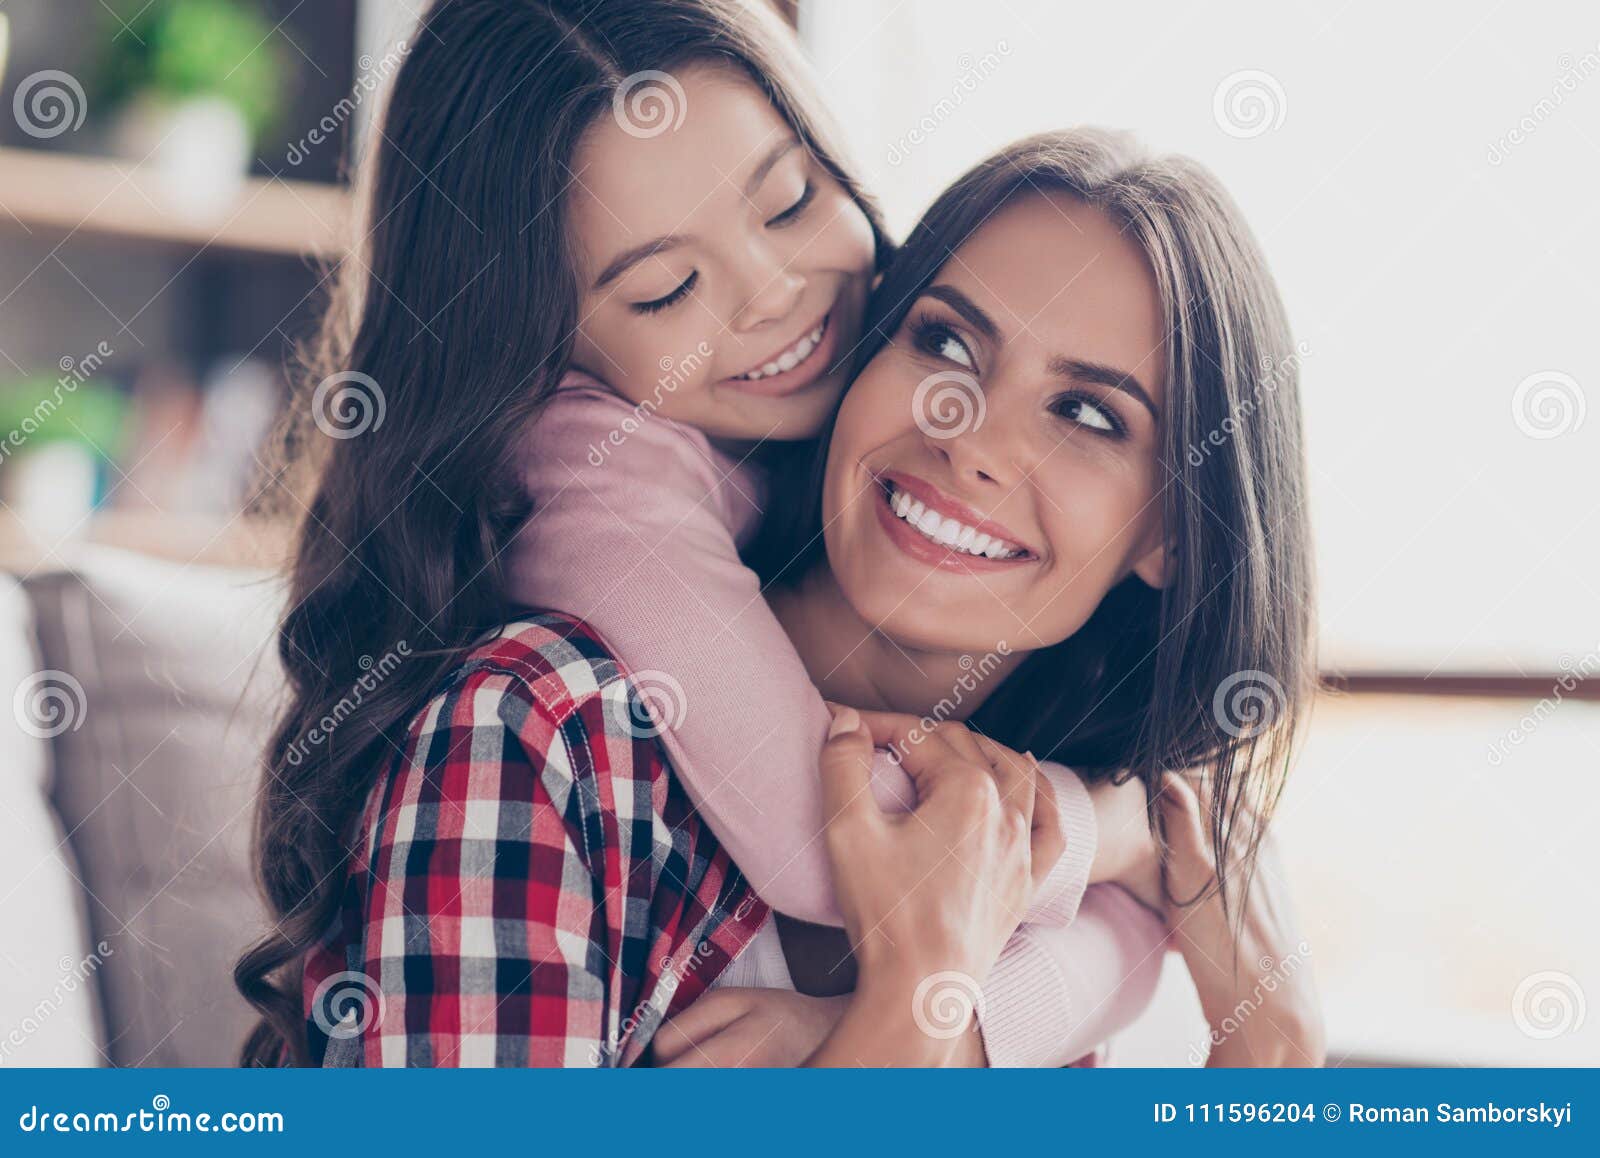 playful small girl with long dark hair is hugging her mum`s neck